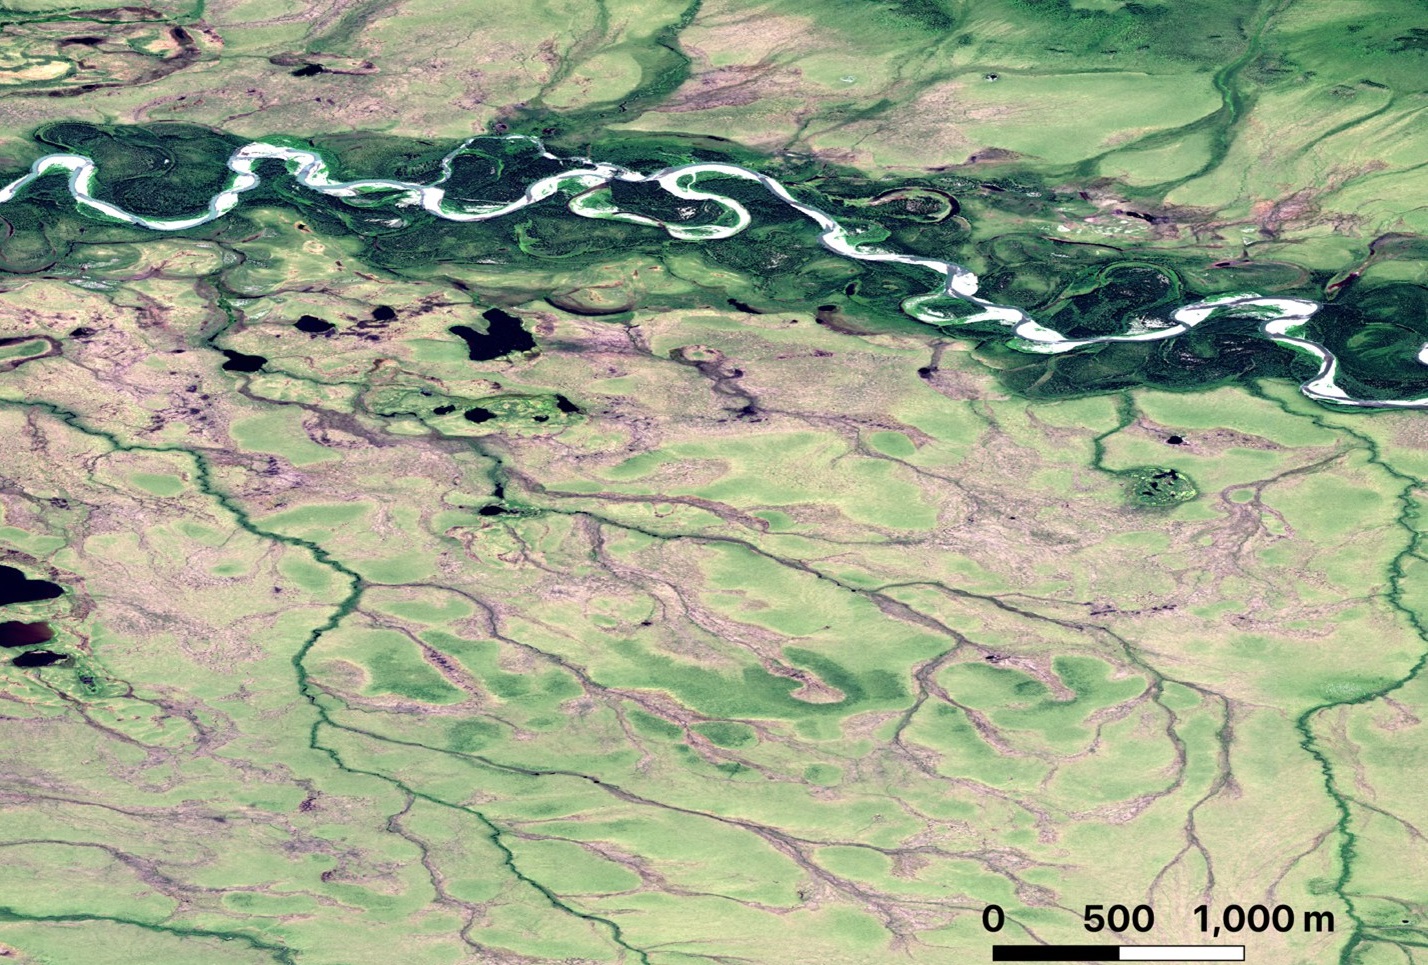 Satellite imagery shows Selawik River drainage networks at various states of development and connectivity